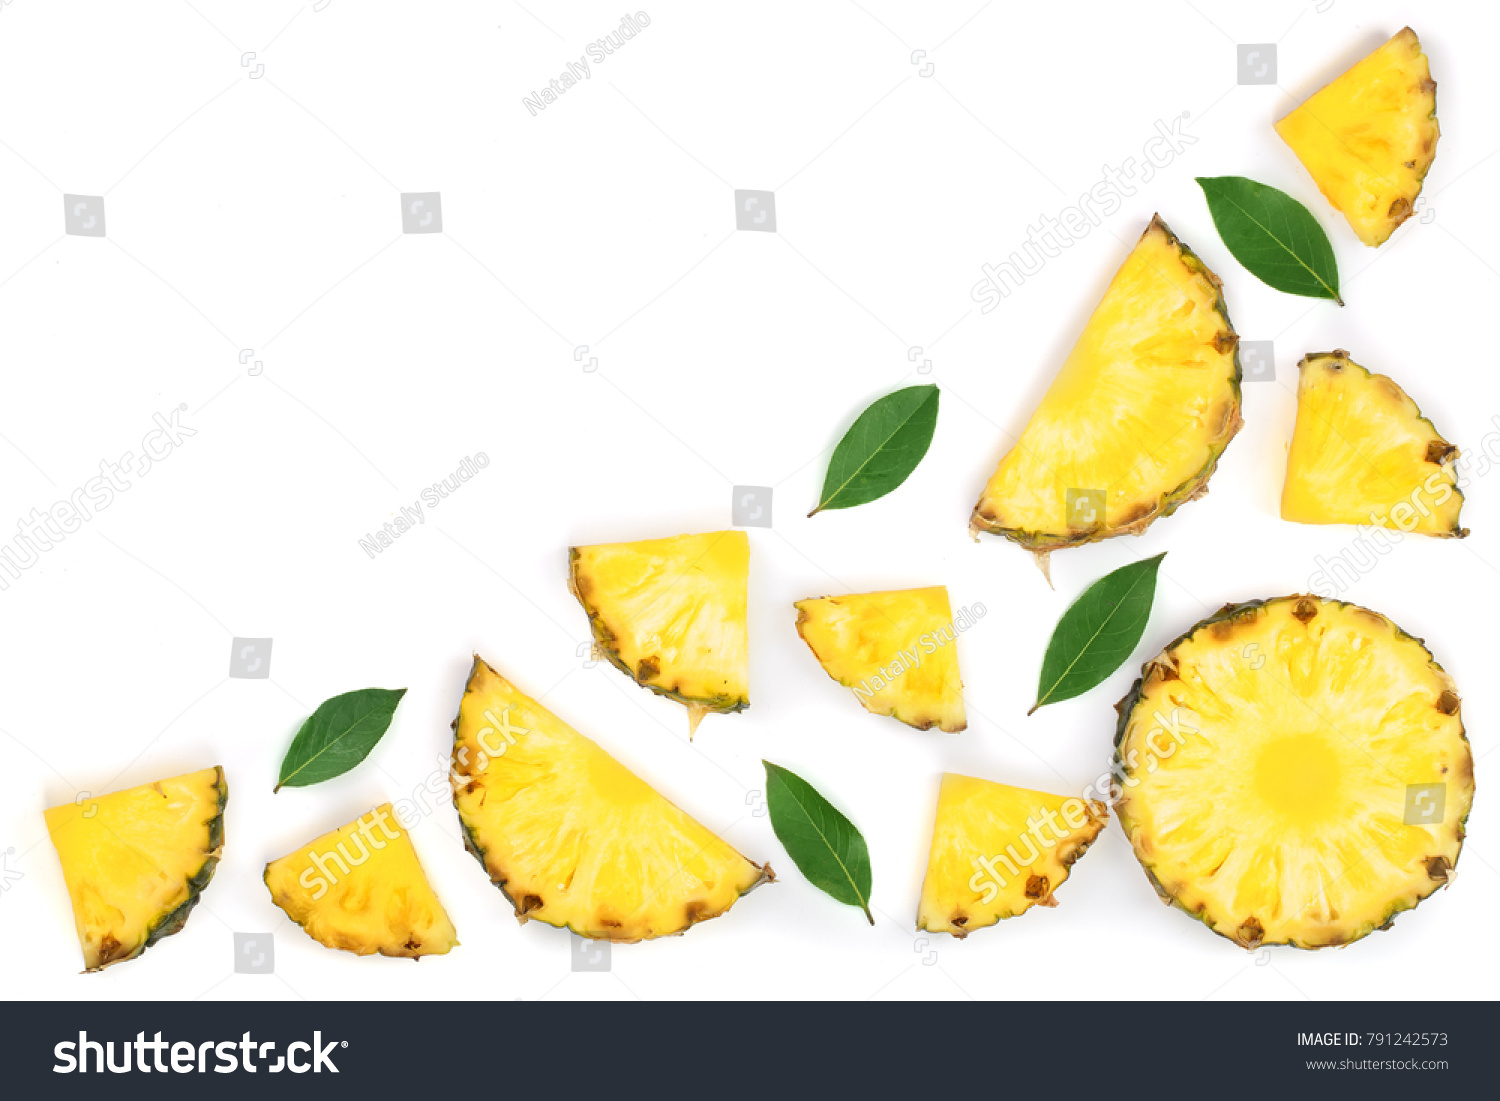 Sliced pineapple with green leaves isolated on white background with copy space for your text. Top view #791242573